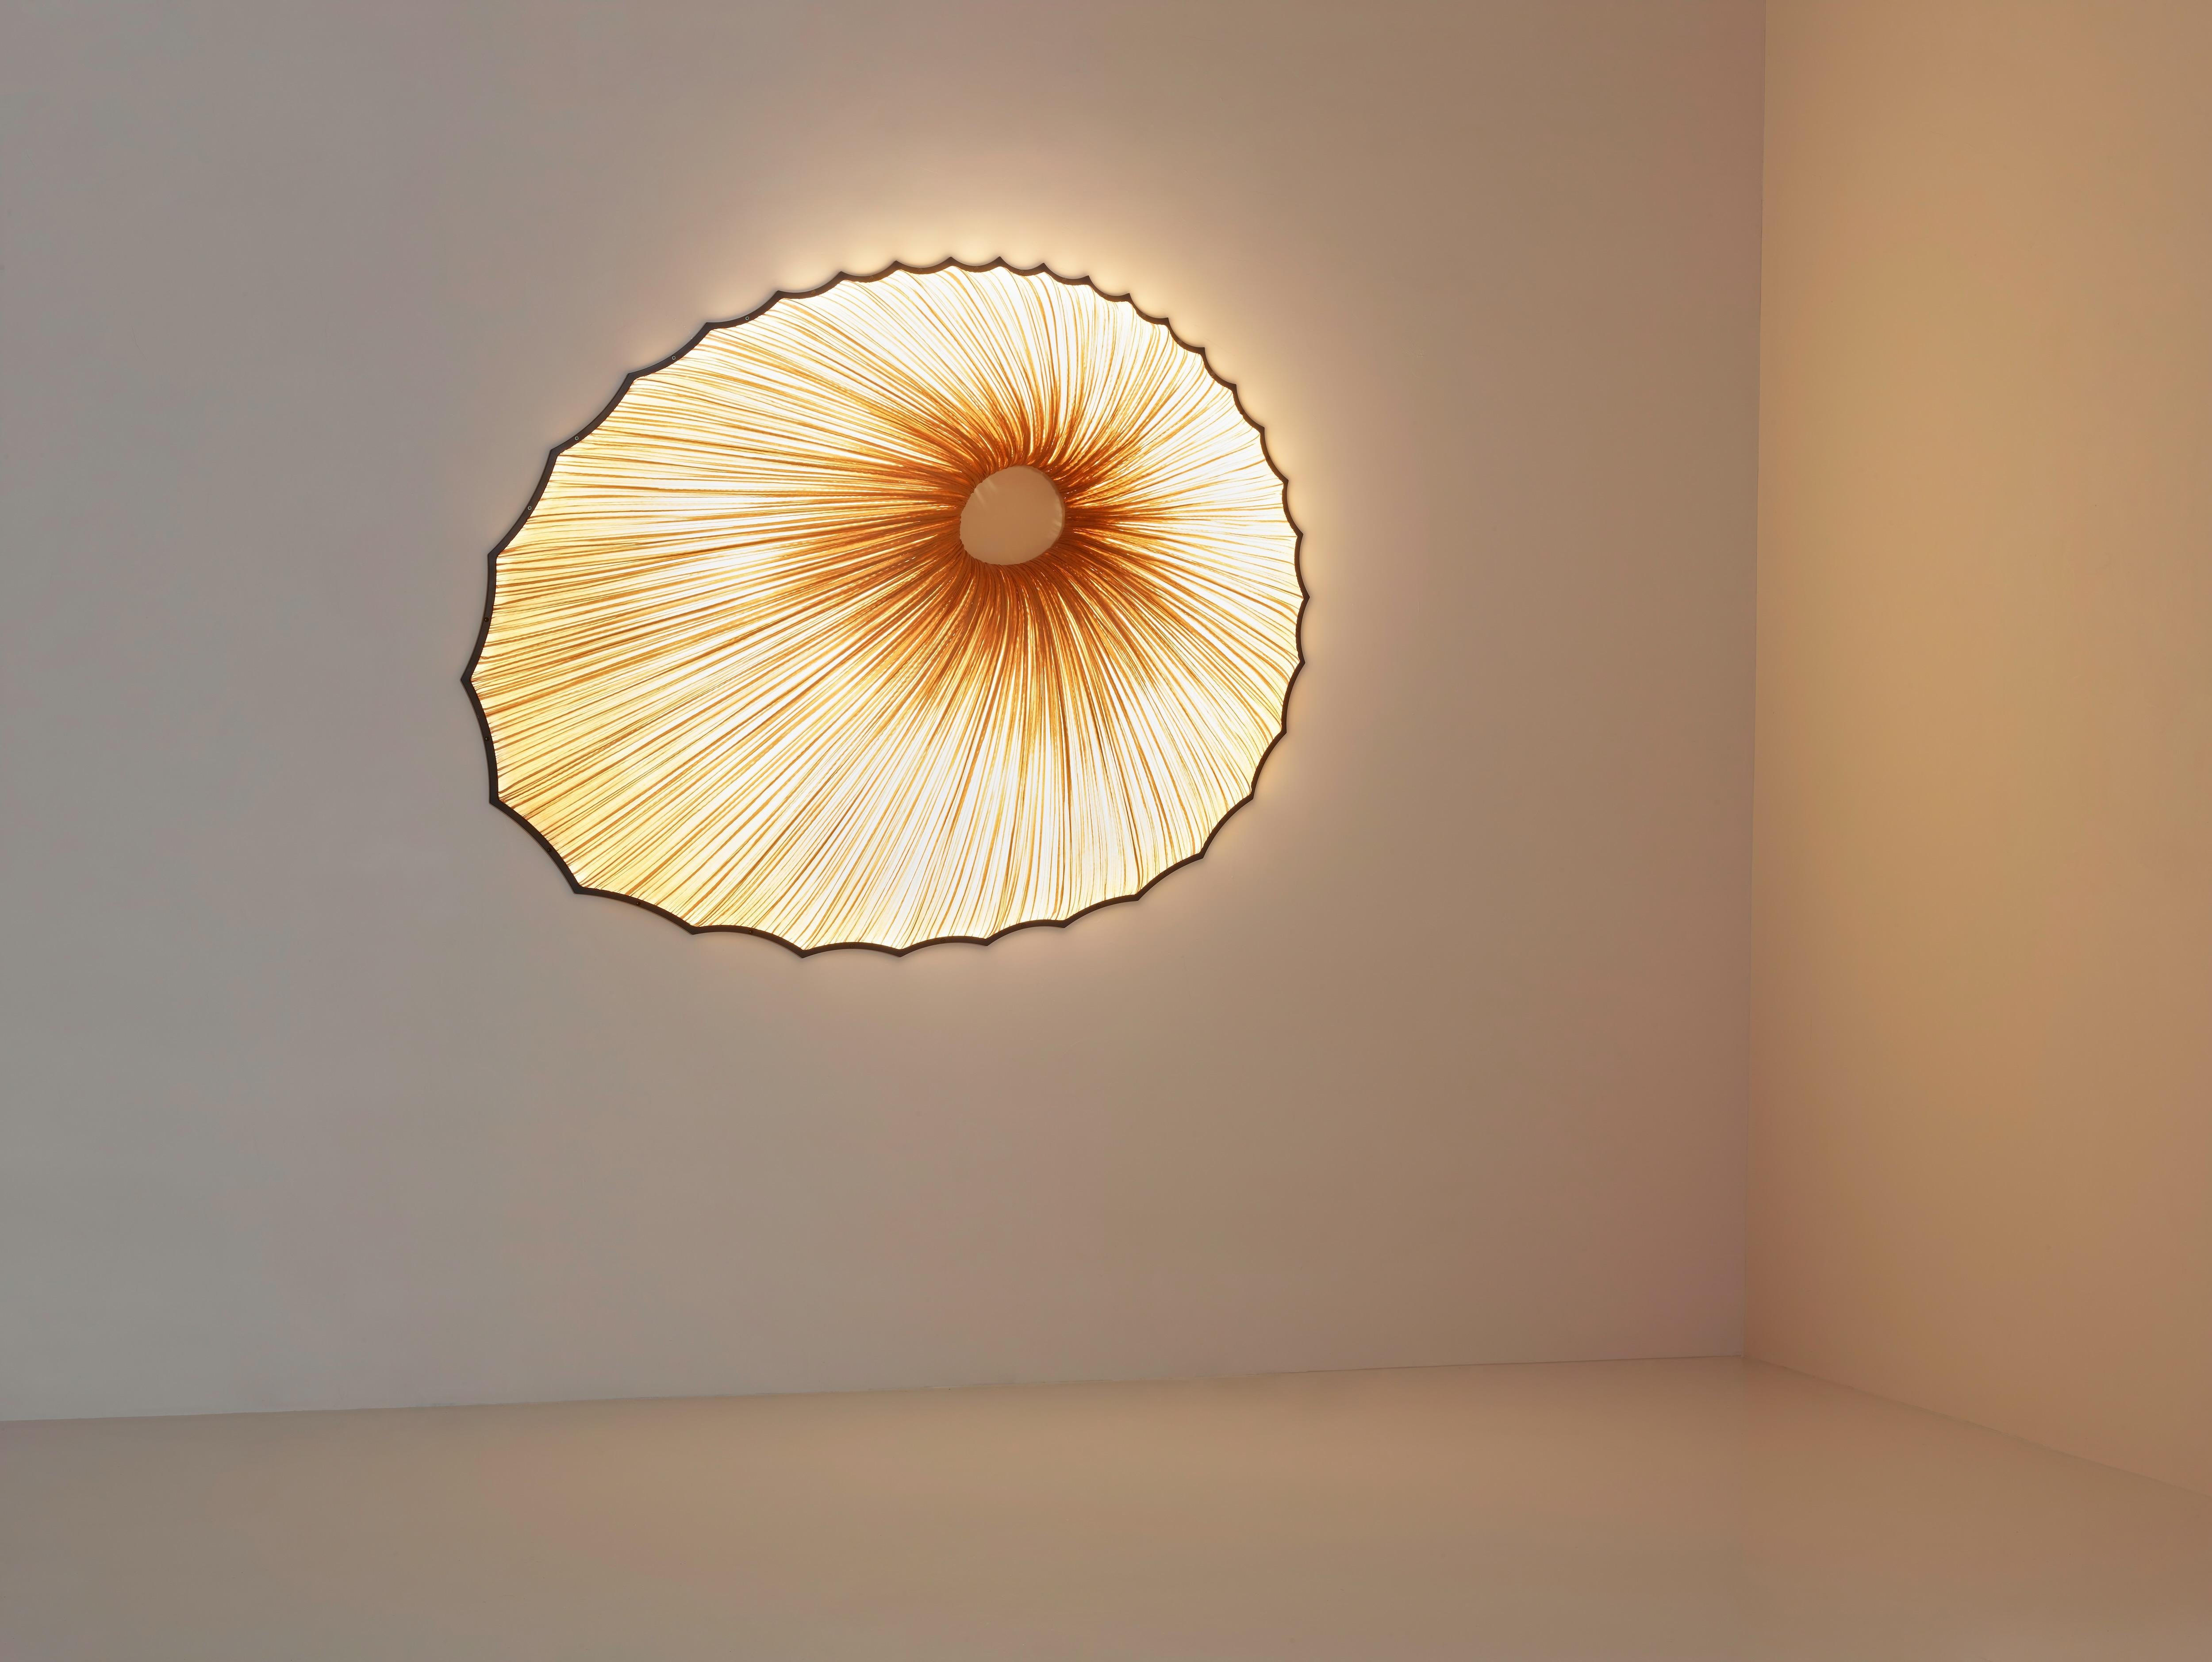 The Sikus wall fixture is part of the Orchestra Family of lighting designs. Its rounded sculptural form can add drama to any space, and this wall light is particularly evocative in our warm silk colors.